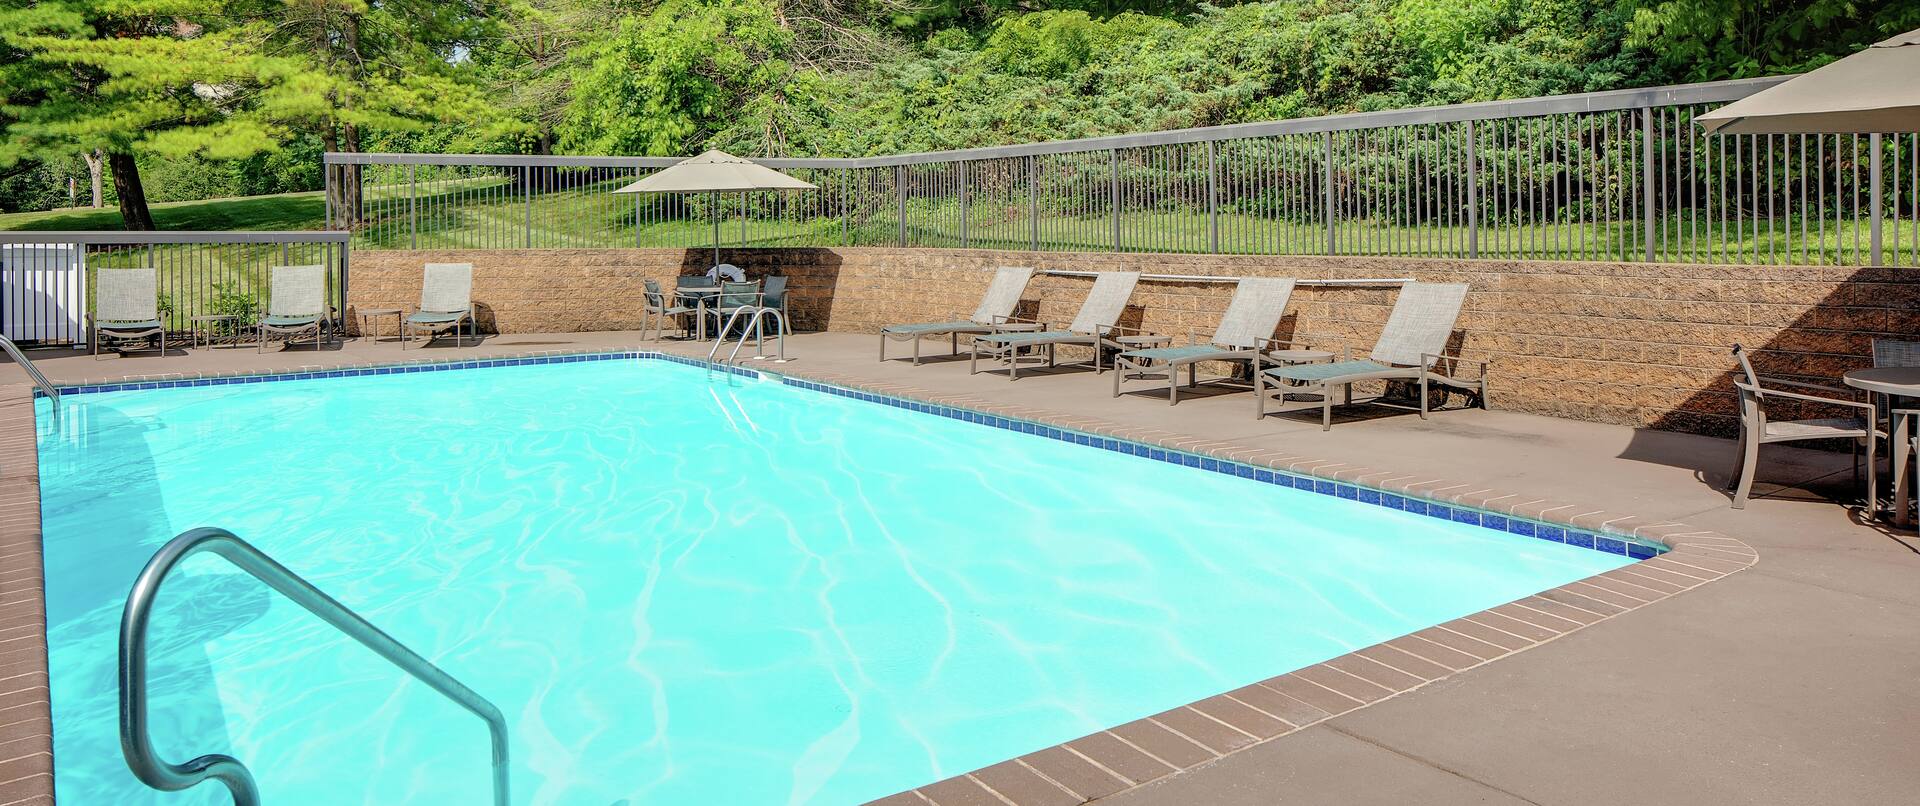 Outdoor Swimming Pool at Daytime with Deck Chairs